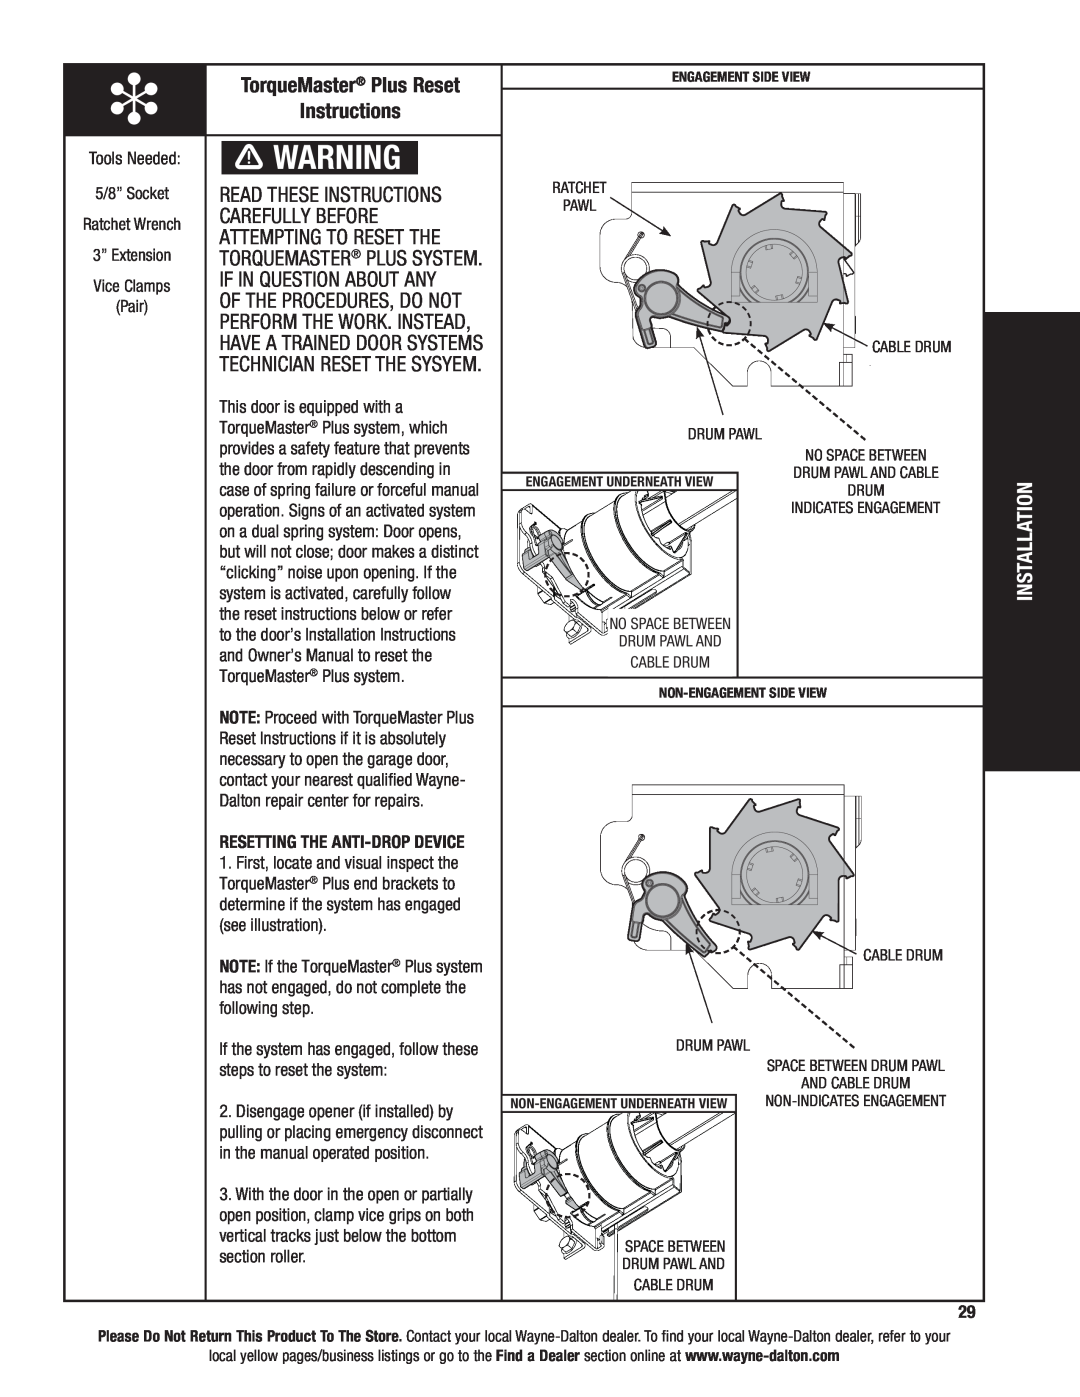 Wayne-Dalton 9600, 9400 TorqueMaster Plus Reset, Read These Instructions, Carefully Before, Attempting To Reset The 